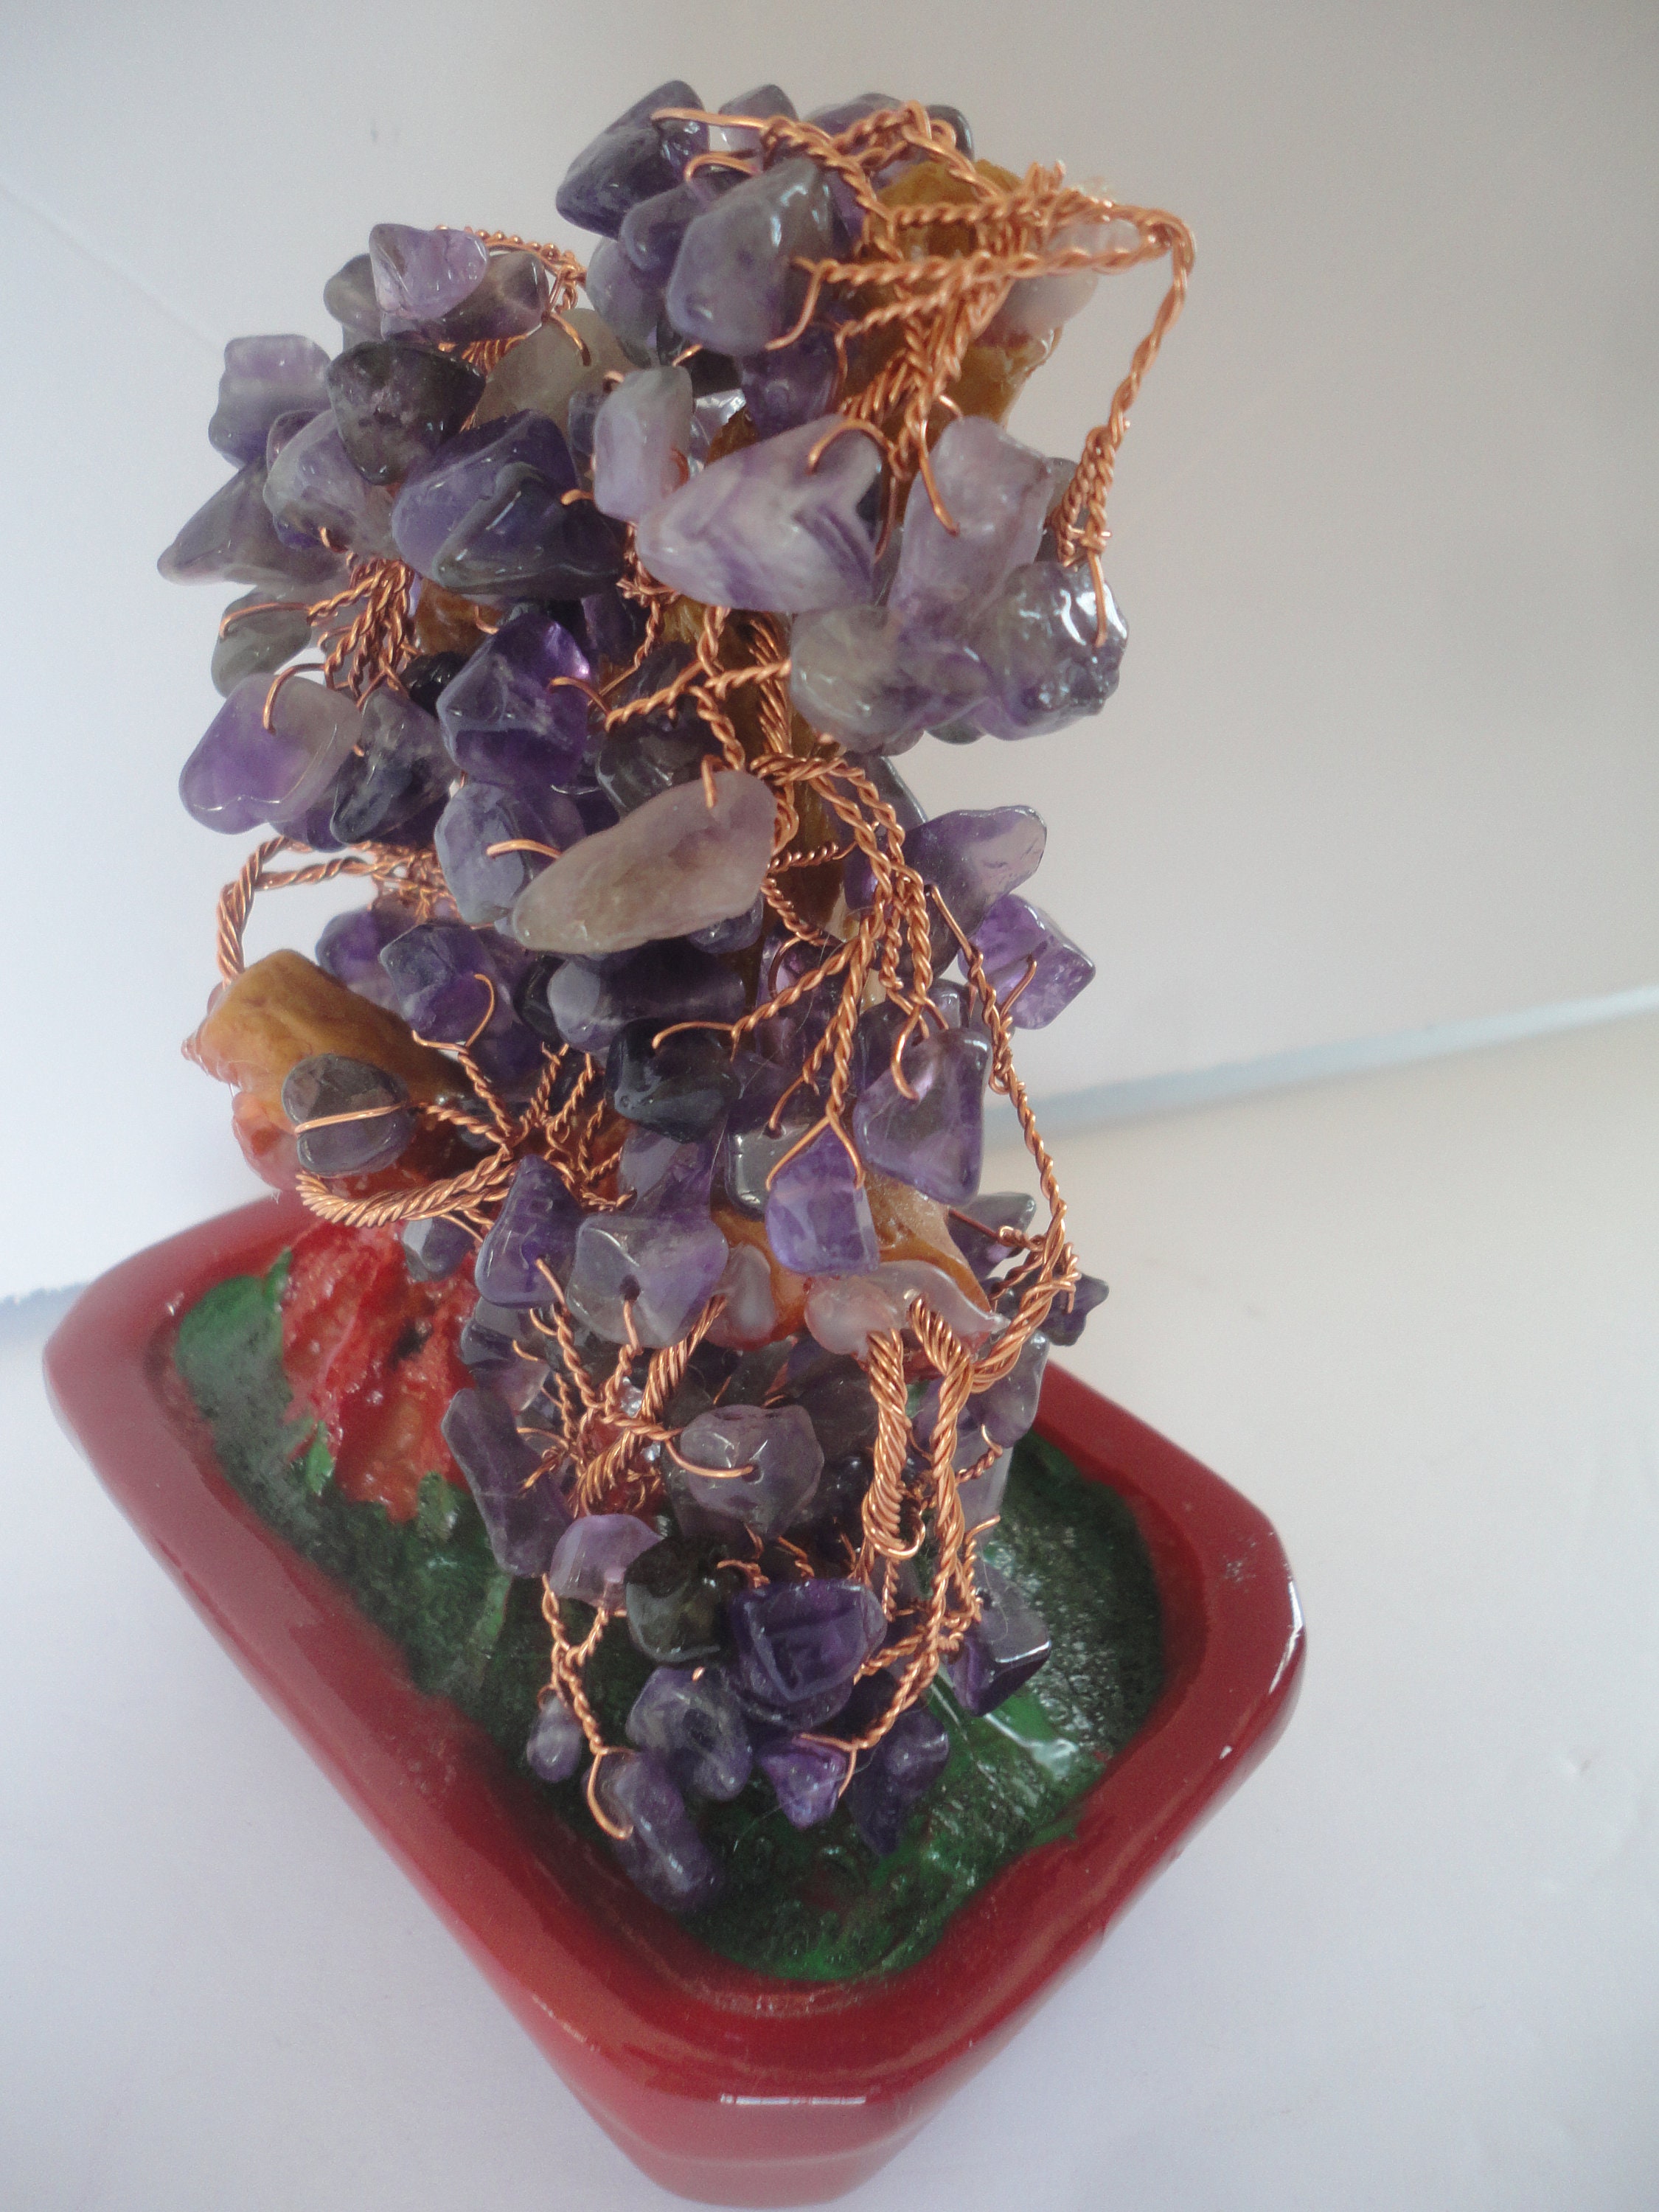 Vintage Bonsai Tree Amethyst Gemstone Leaves and Copper Wire Branches